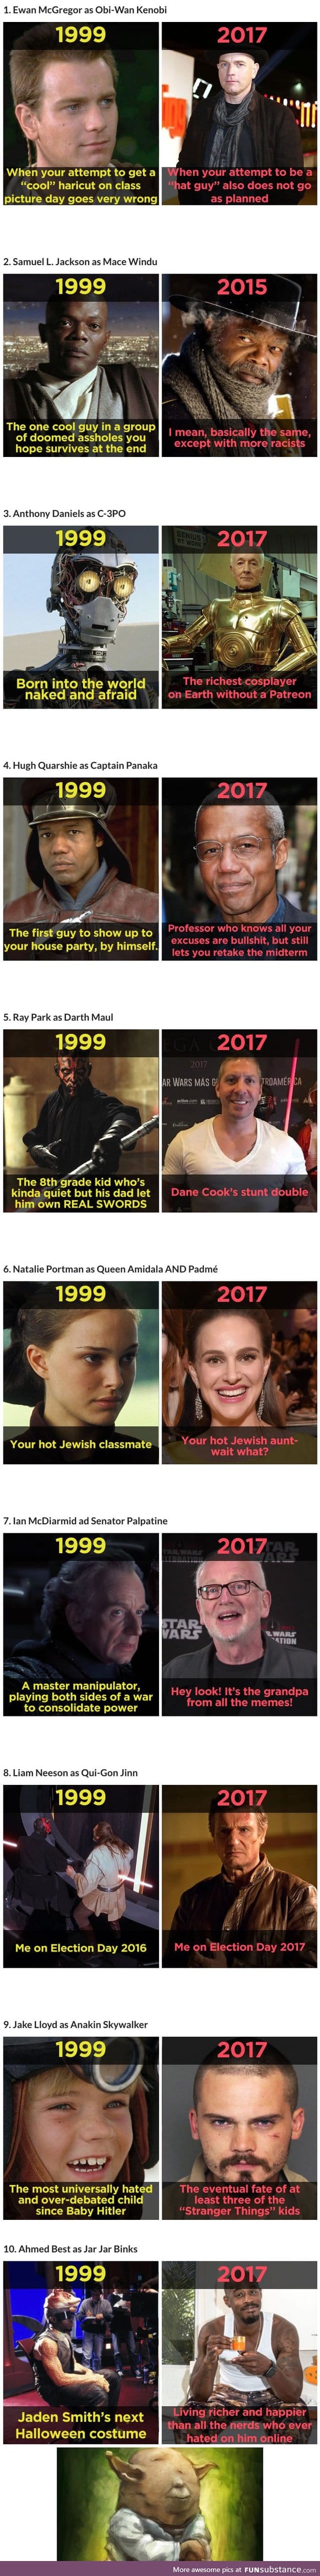 How the star wars cast has evolved since the phantom menace in 1999